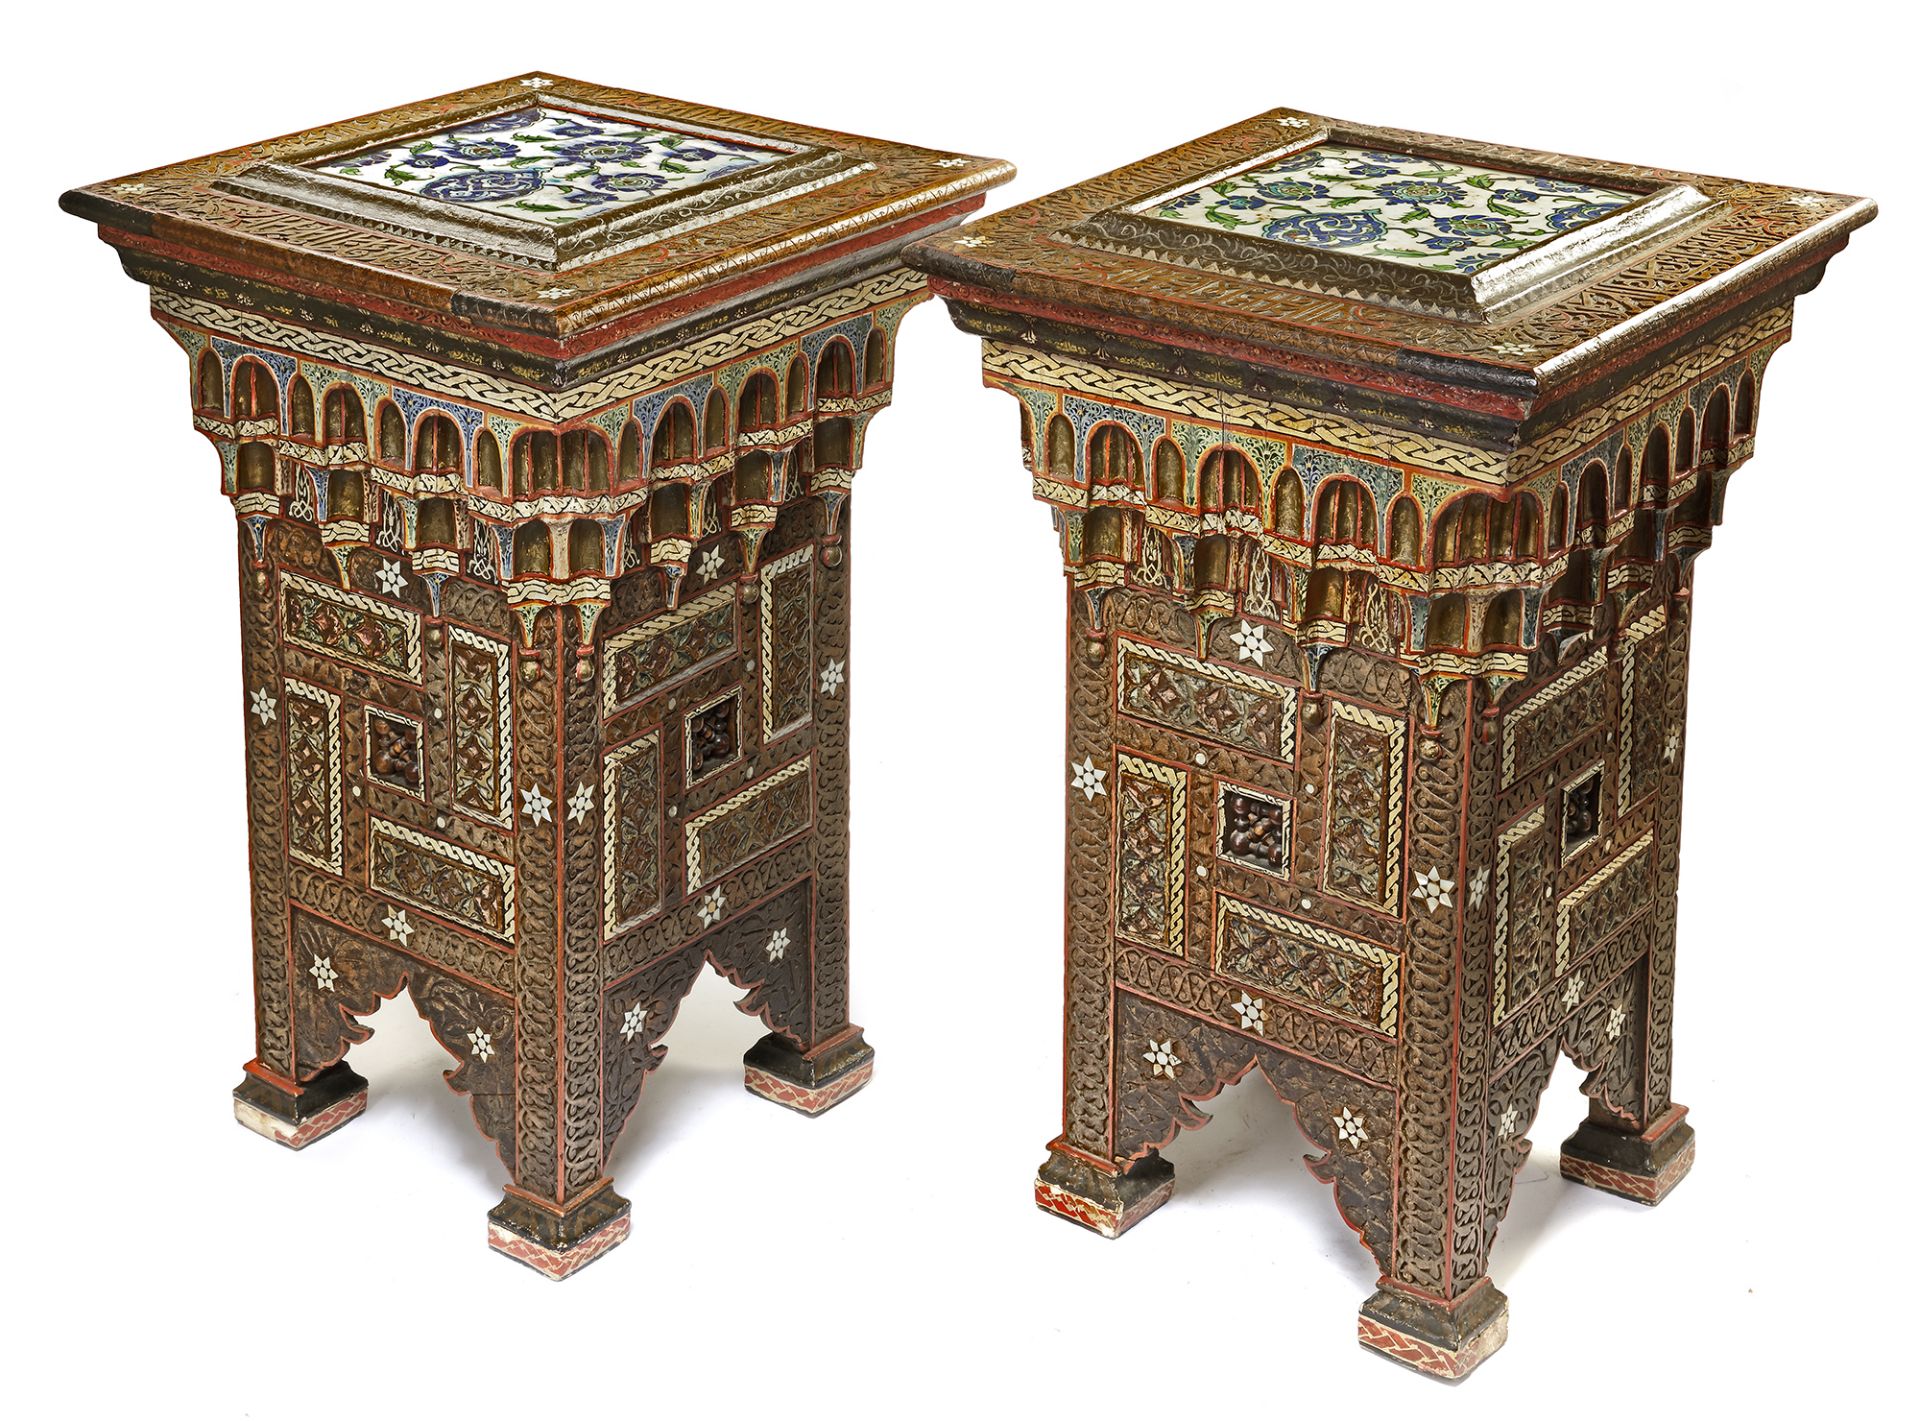 A PAIR OF DAMASCUS BONE-INLAID PAINTED WOOD PLANT STANDS INLAID WITH DAMASCUS POTTERY TILES, SYRIA, - Image 3 of 10